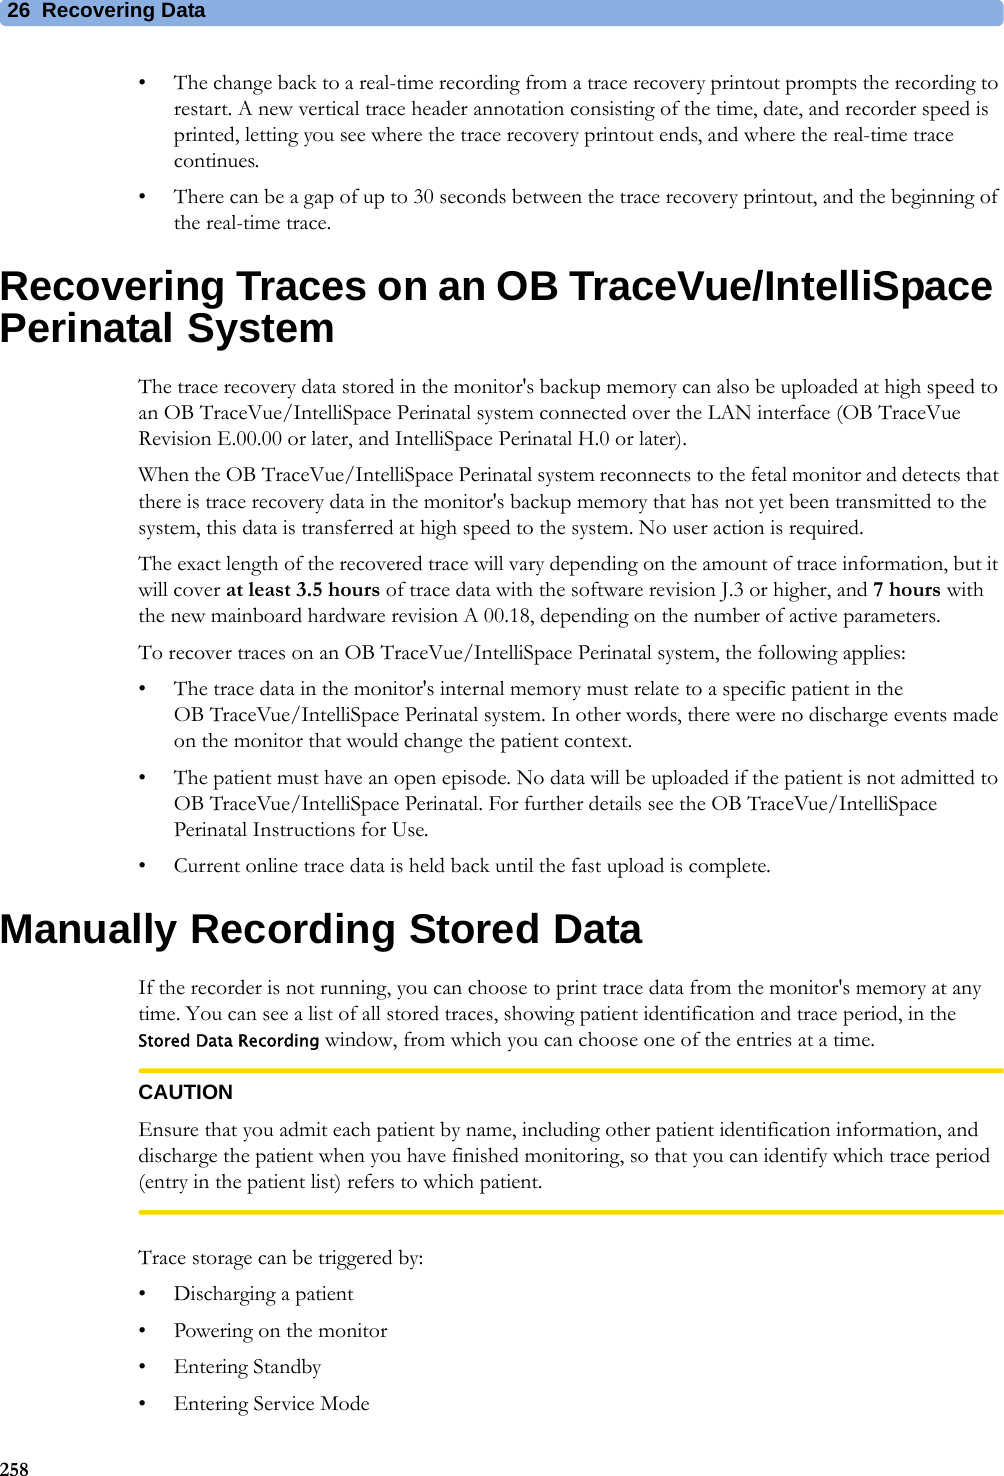 26  Recovering Data258• The change back to a real-time recording from a trace recovery printout prompts the recording to restart. A new vertical trace header annotation consisting of the time, date, and recorder speed is printed, letting you see where the trace recovery printout ends, and where the real-time trace continues.• There can be a gap of up to 30 seconds between the trace recovery printout, and the beginning of the real-time trace.Recovering Traces on an OB TraceVue/IntelliSpace Perinatal SystemThe trace recovery data stored in the monitor&apos;s backup memory can also be uploaded at high speed to an OB TraceVue/IntelliSpace Perinatal system connected over the LAN interface (OB TraceVue Revision E.00.00 or later, and IntelliSpace Perinatal H.0 or later).When the OB TraceVue/IntelliSpace Perinatal system reconnects to the fetal monitor and detects that there is trace recovery data in the monitor&apos;s backup memory that has not yet been transmitted to the system, this data is transferred at high speed to the system. No user action is required.The exact length of the recovered trace will vary depending on the amount of trace information, but it will cover at least 3.5 hours of trace data with the software revision J.3 or higher, and 7 hours with the new mainboard hardware revision A 00.18, depending on the number of active parameters.To recover traces on an OB TraceVue/IntelliSpace Perinatal system, the following applies:• The trace data in the monitor&apos;s internal memory must relate to a specific patient in the OB TraceVue/IntelliSpace Perinatal system. In other words, there were no discharge events made on the monitor that would change the patient context.• The patient must have an open episode. No data will be uploaded if the patient is not admitted to OB TraceVue/IntelliSpace Perinatal. For further details see the OB TraceVue/IntelliSpace Perinatal Instructions for Use.• Current online trace data is held back until the fast upload is complete.Manually Recording Stored DataIf the recorder is not running, you can choose to print trace data from the monitor&apos;s memory at any time. You can see a list of all stored traces, showing patient identification and trace period, in the Stored Data Recording window, from which you can choose one of the entries at a time.CAUTIONEnsure that you admit each patient by name, including other patient identification information, and discharge the patient when you have finished monitoring, so that you can identify which trace period (entry in the patient list) refers to which patient.Trace storage can be triggered by:• Discharging a patient• Powering on the monitor•Entering Standby• Entering Service Mode